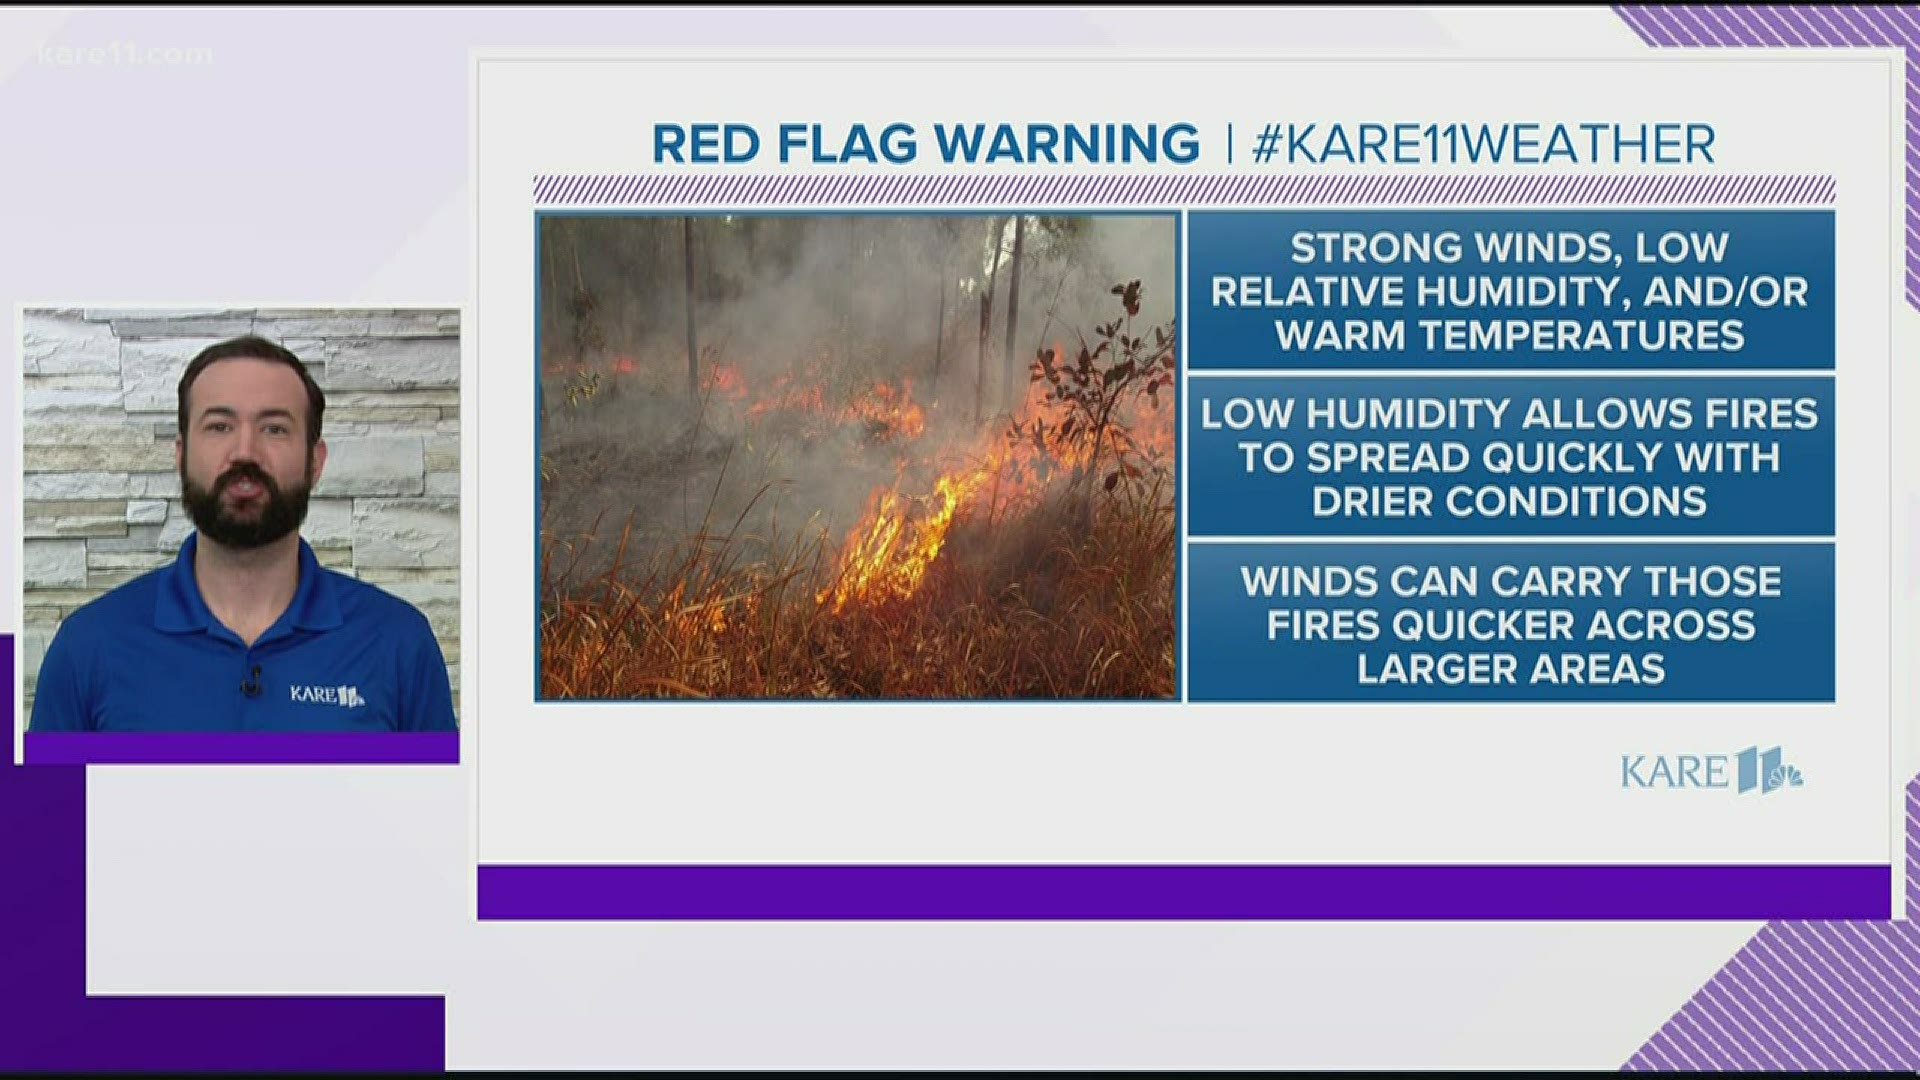 JD explains what a red flag warning is and how it affects Minnesota.